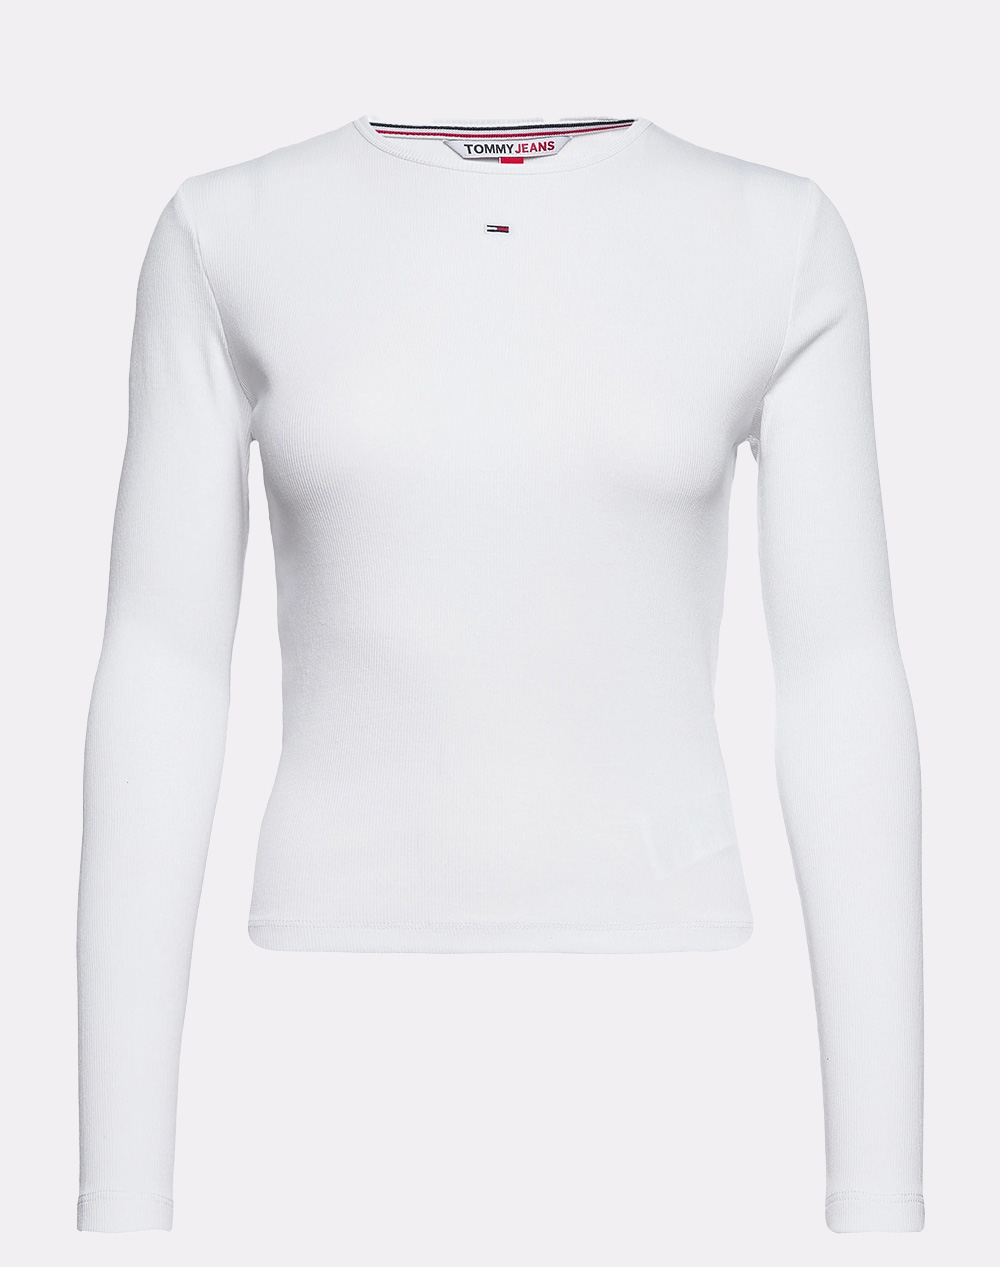 TOMMY JEANS LONG-SLEEVED - TEE TJW BABY JERSEY C-NECK White RIB